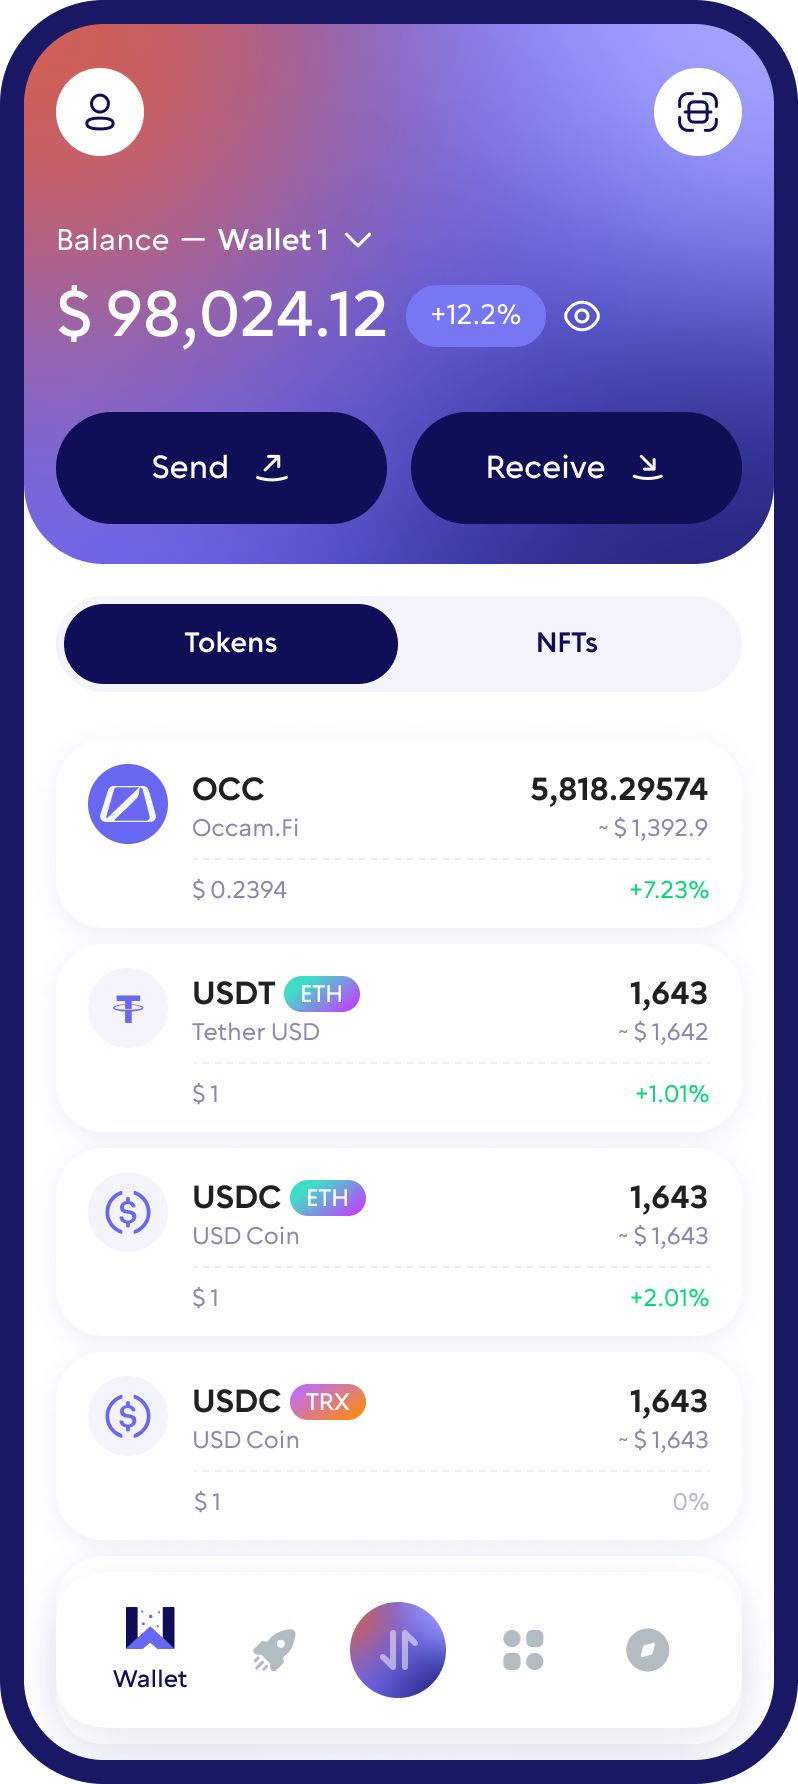 Occam.Fi (OCC) Cryptocurrency Wallet Walletverse